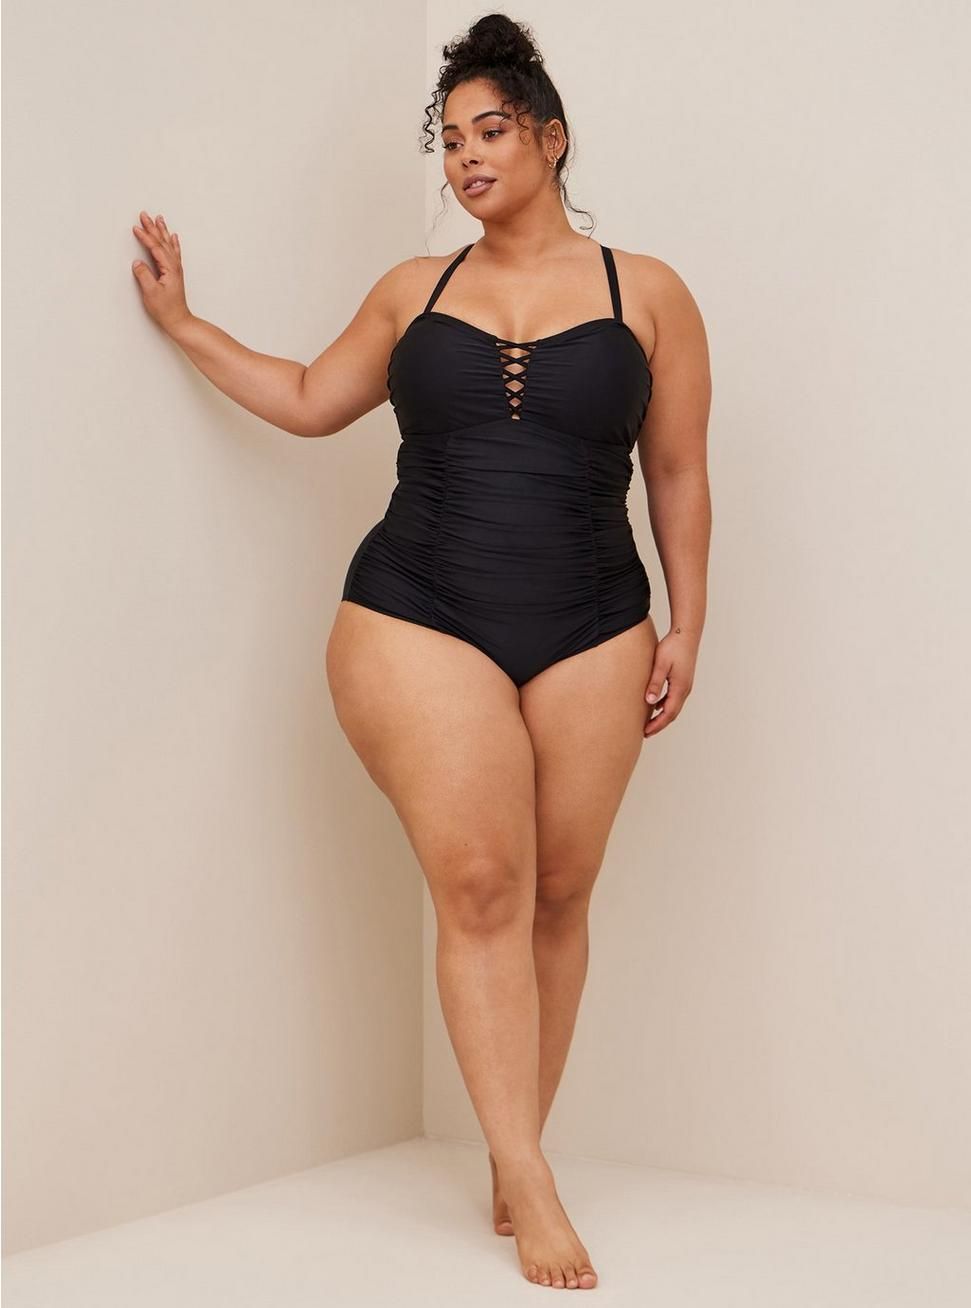 46 Best Plus-Size Bathing Suits In 2023, According To Reviews